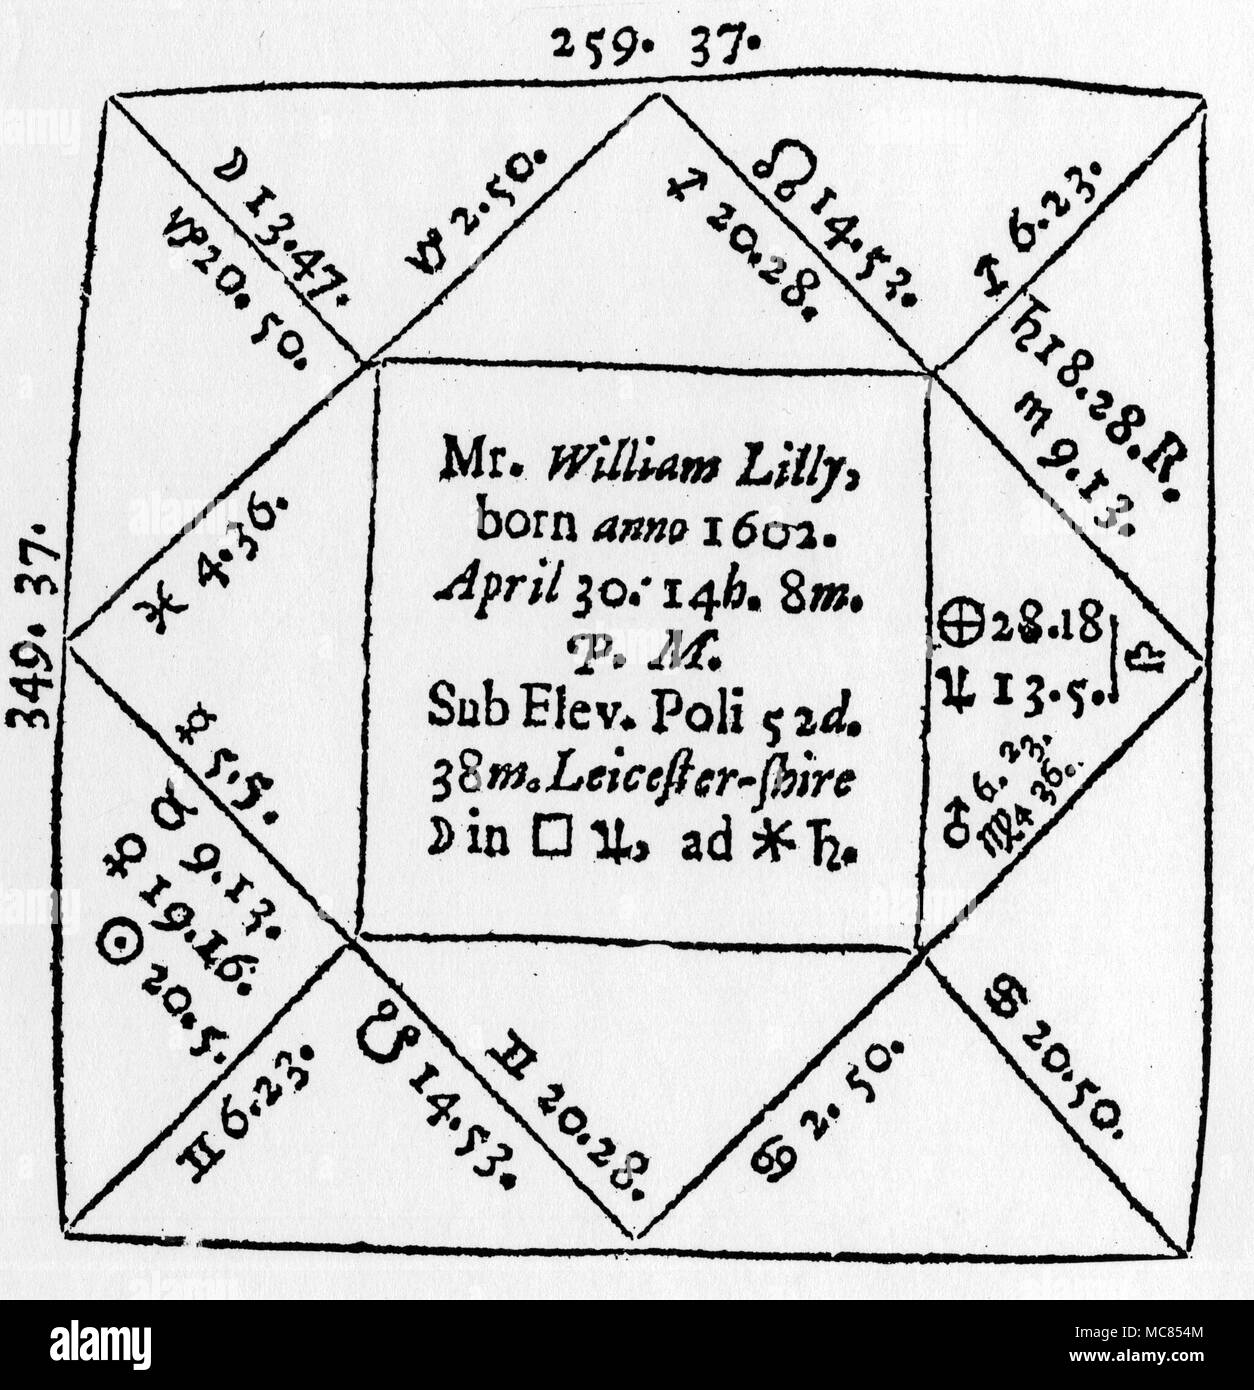 Horoscopes - William Lilly Horoscope of 17th century English astrologer, William Lilly. From John Gadbury, collectio Geniturarum: or, A Collection of Nativities in CL Genitures (1662) Stock Photo